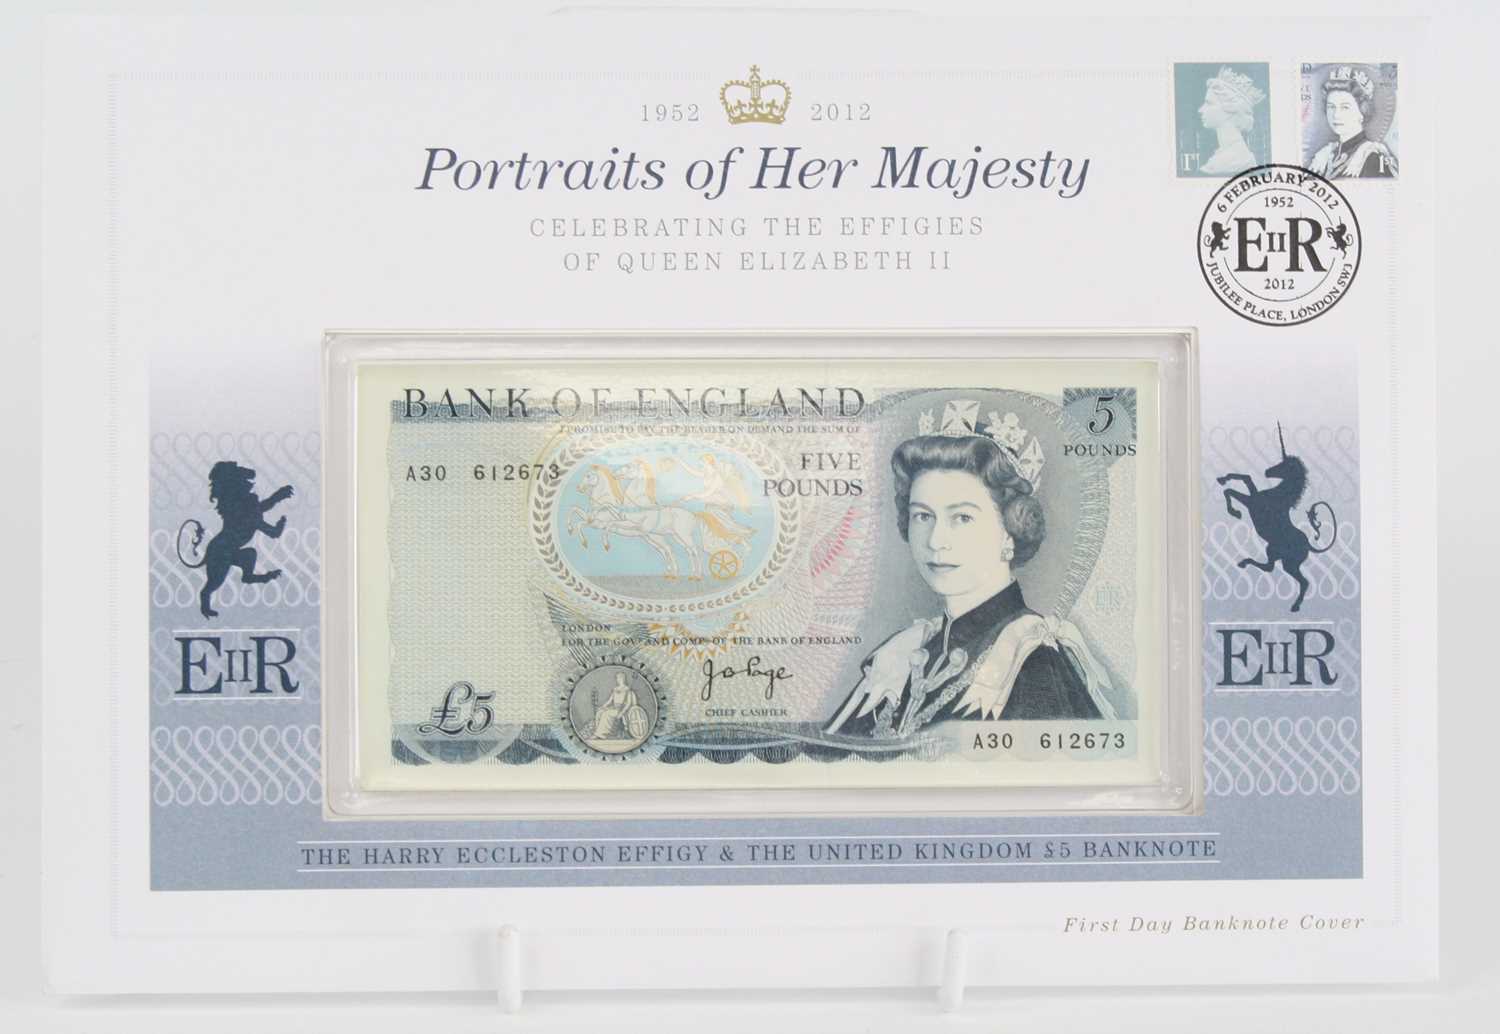 United Kingdom, Westminster Mint, 1952-2012 Potraits of Her Majesty First Day Coin and Banknote